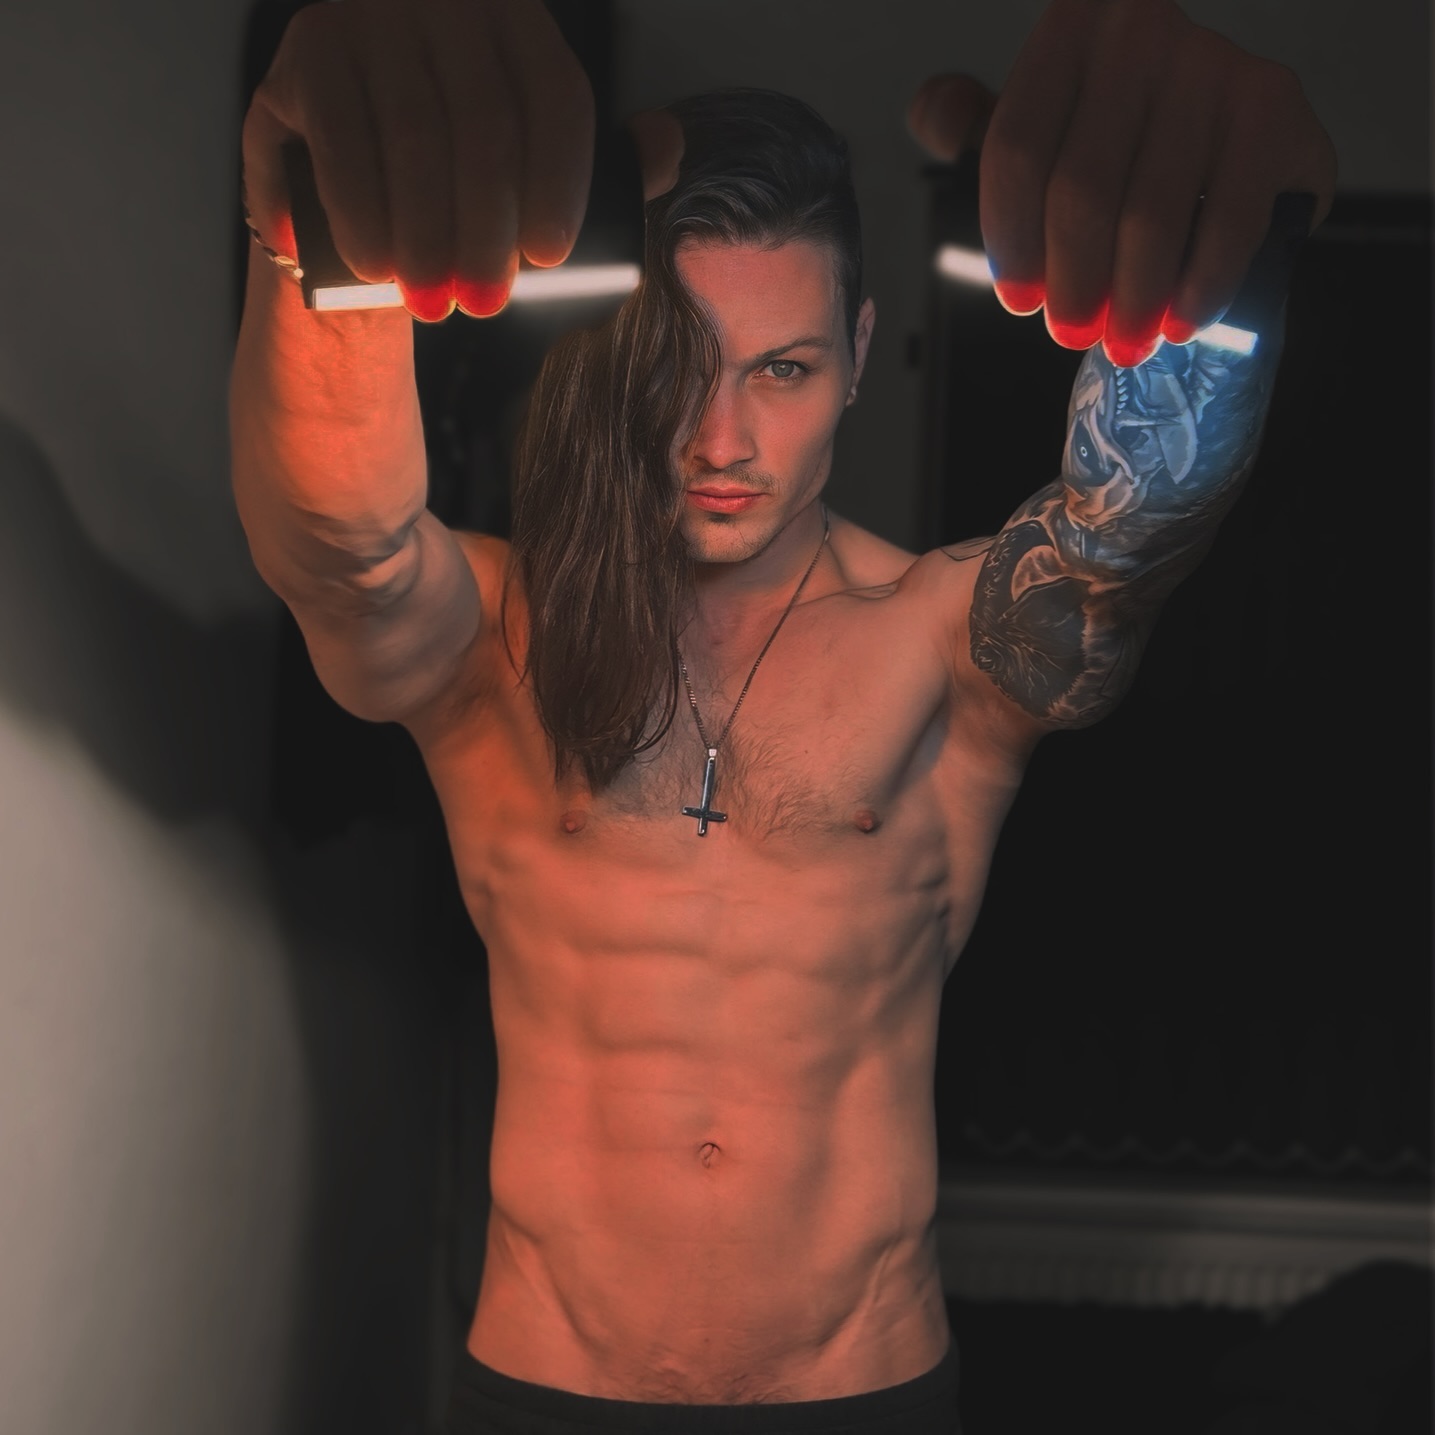 “Your reflection, your bitter deception setting you free.”🎶 
.
.
.
.
.
#lights #ink #inked #tattoo #tattoos #guyswithtattoos #altmodel #model #altfashion #fashion #postoftheday #photography #emo #goth #alt #alternative #gym #fitness #abs #sixpack #muscle #booktok #bookstagram #ruhndanaan #daltonrivers #sleeve #sleevetattoo